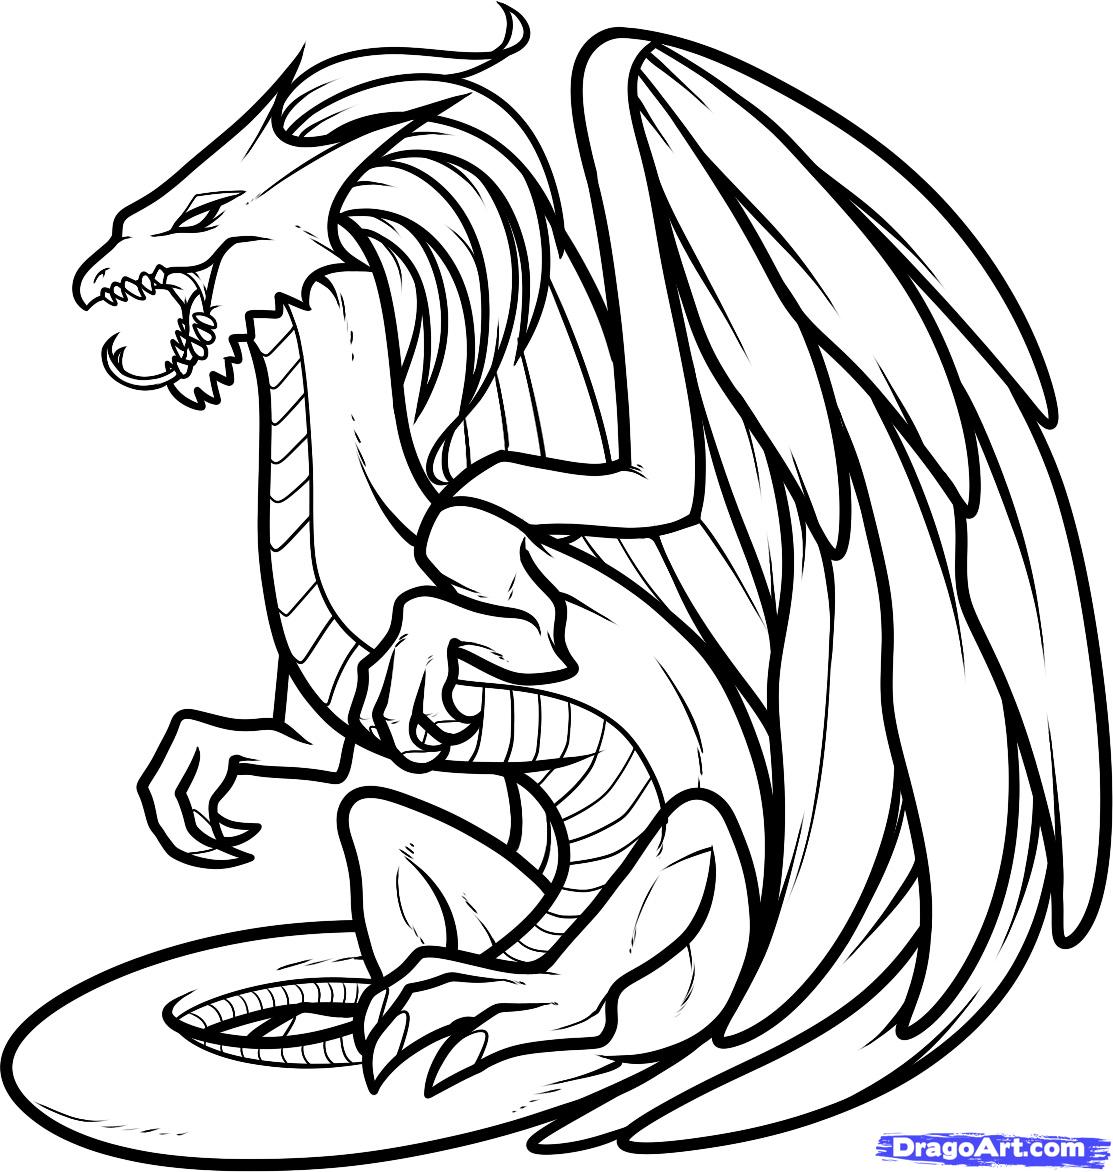 Awesome Dragon Coloring Pages at GetColorings.com | Free ...